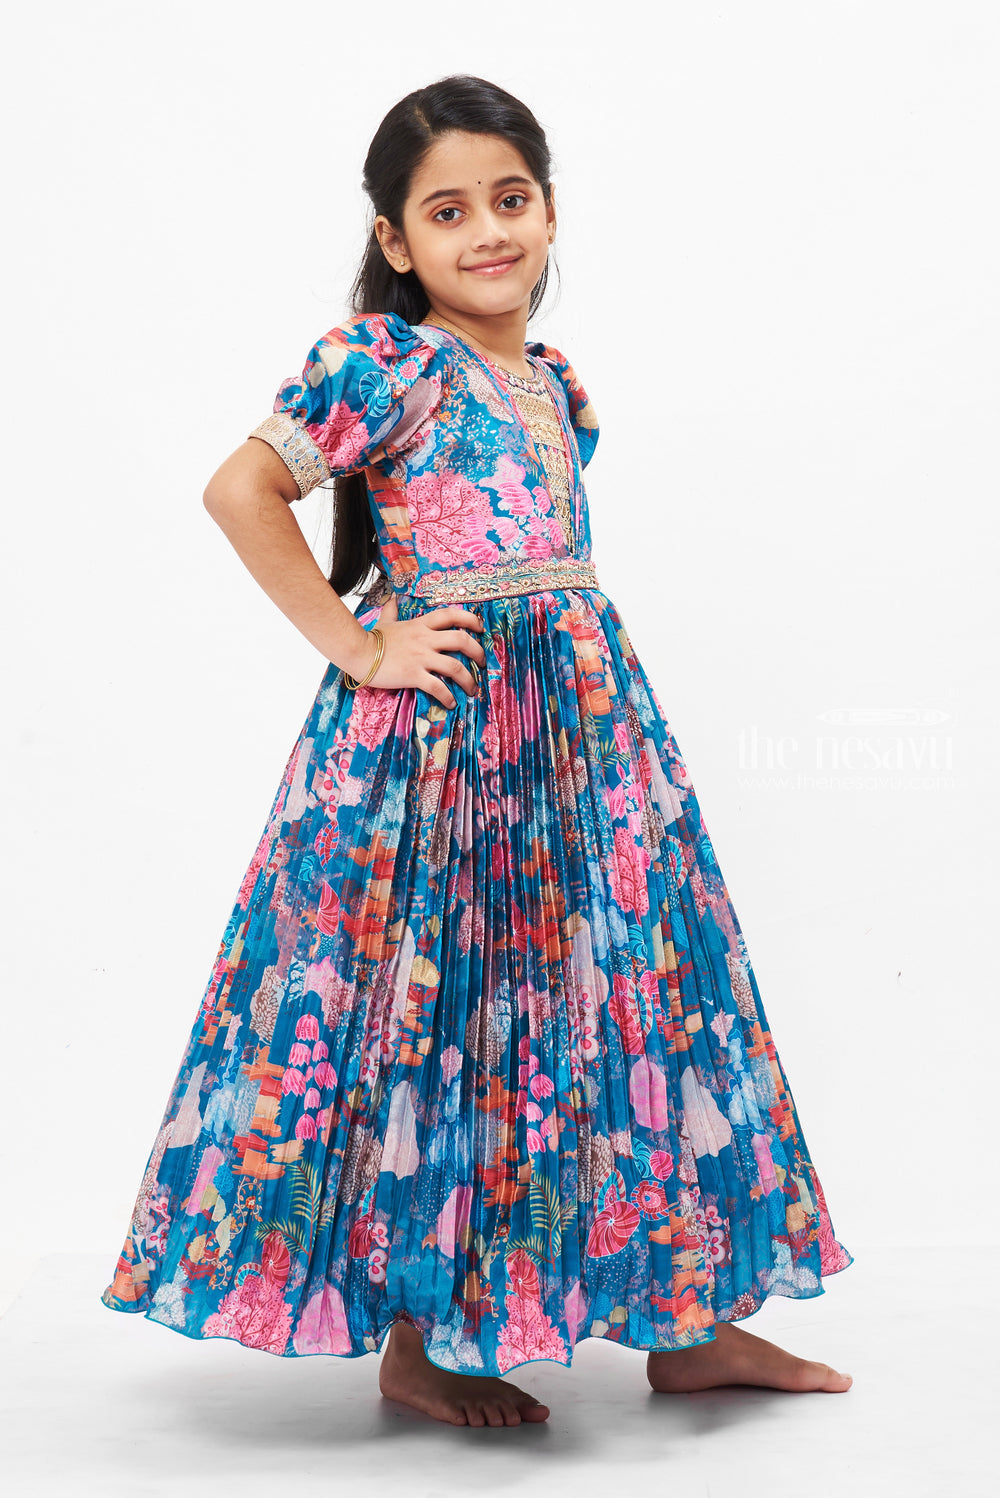 The Nesavu Girls Party Gown Vibrant Floral Anarkali Gown for Girls - Festive and Party Wear Collection Nesavu Traditional Floral Anarkali Gown for Girls | Festive Long Dress Online | The Nesavu